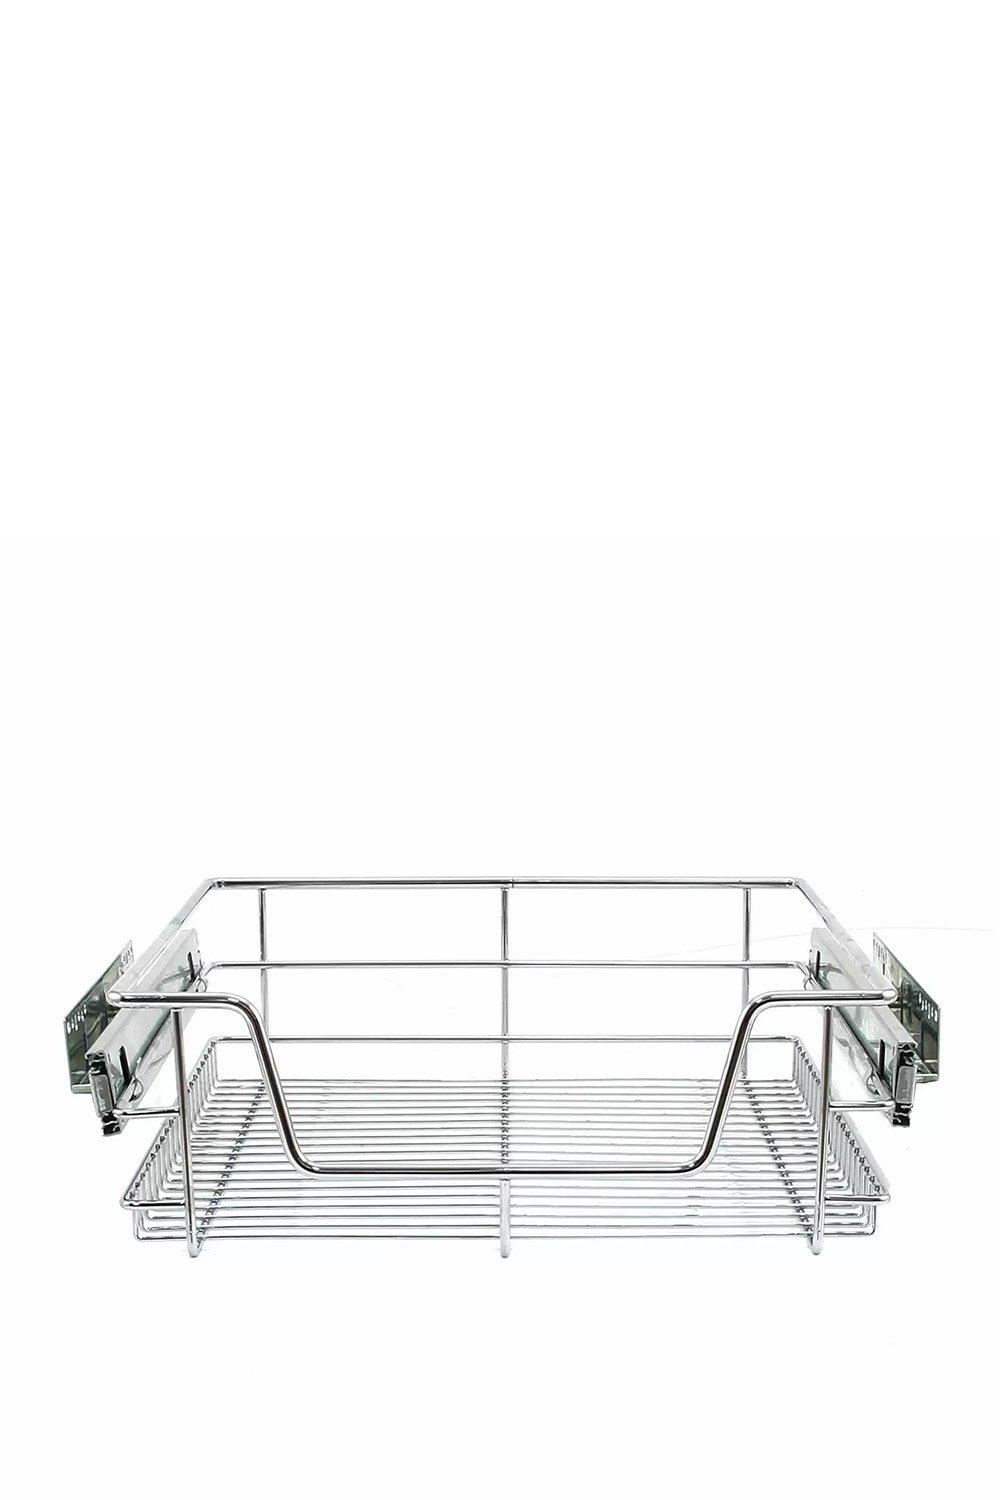 2 x KuKoo Kitchen Pull Out Storage Baskets - 600mm Wide Cabinet